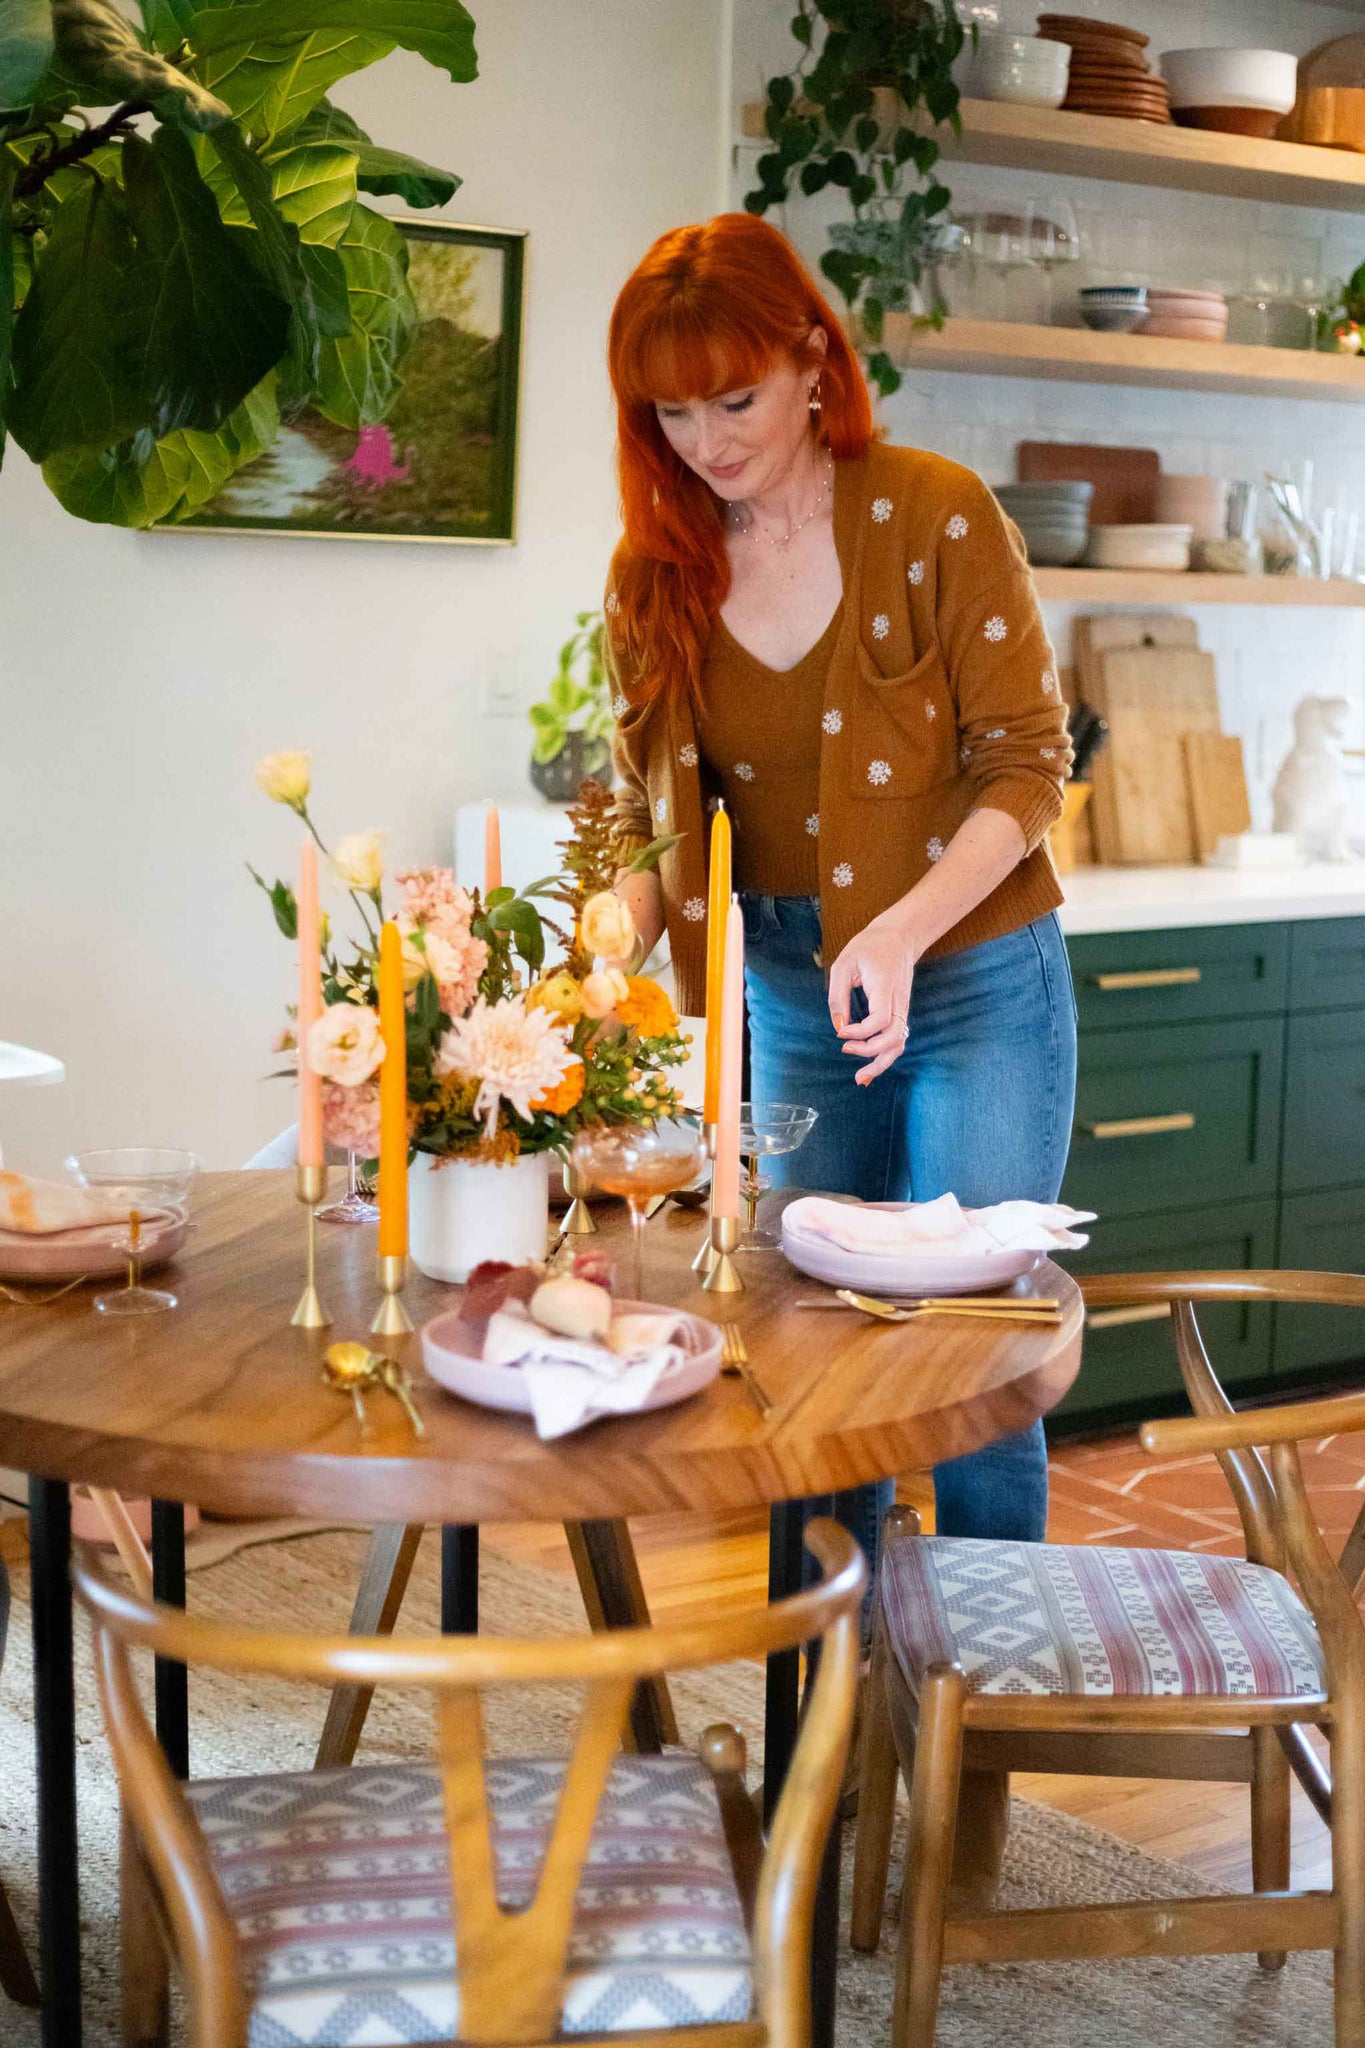 Redhead dressing up the Thanksgiving Table with flowers